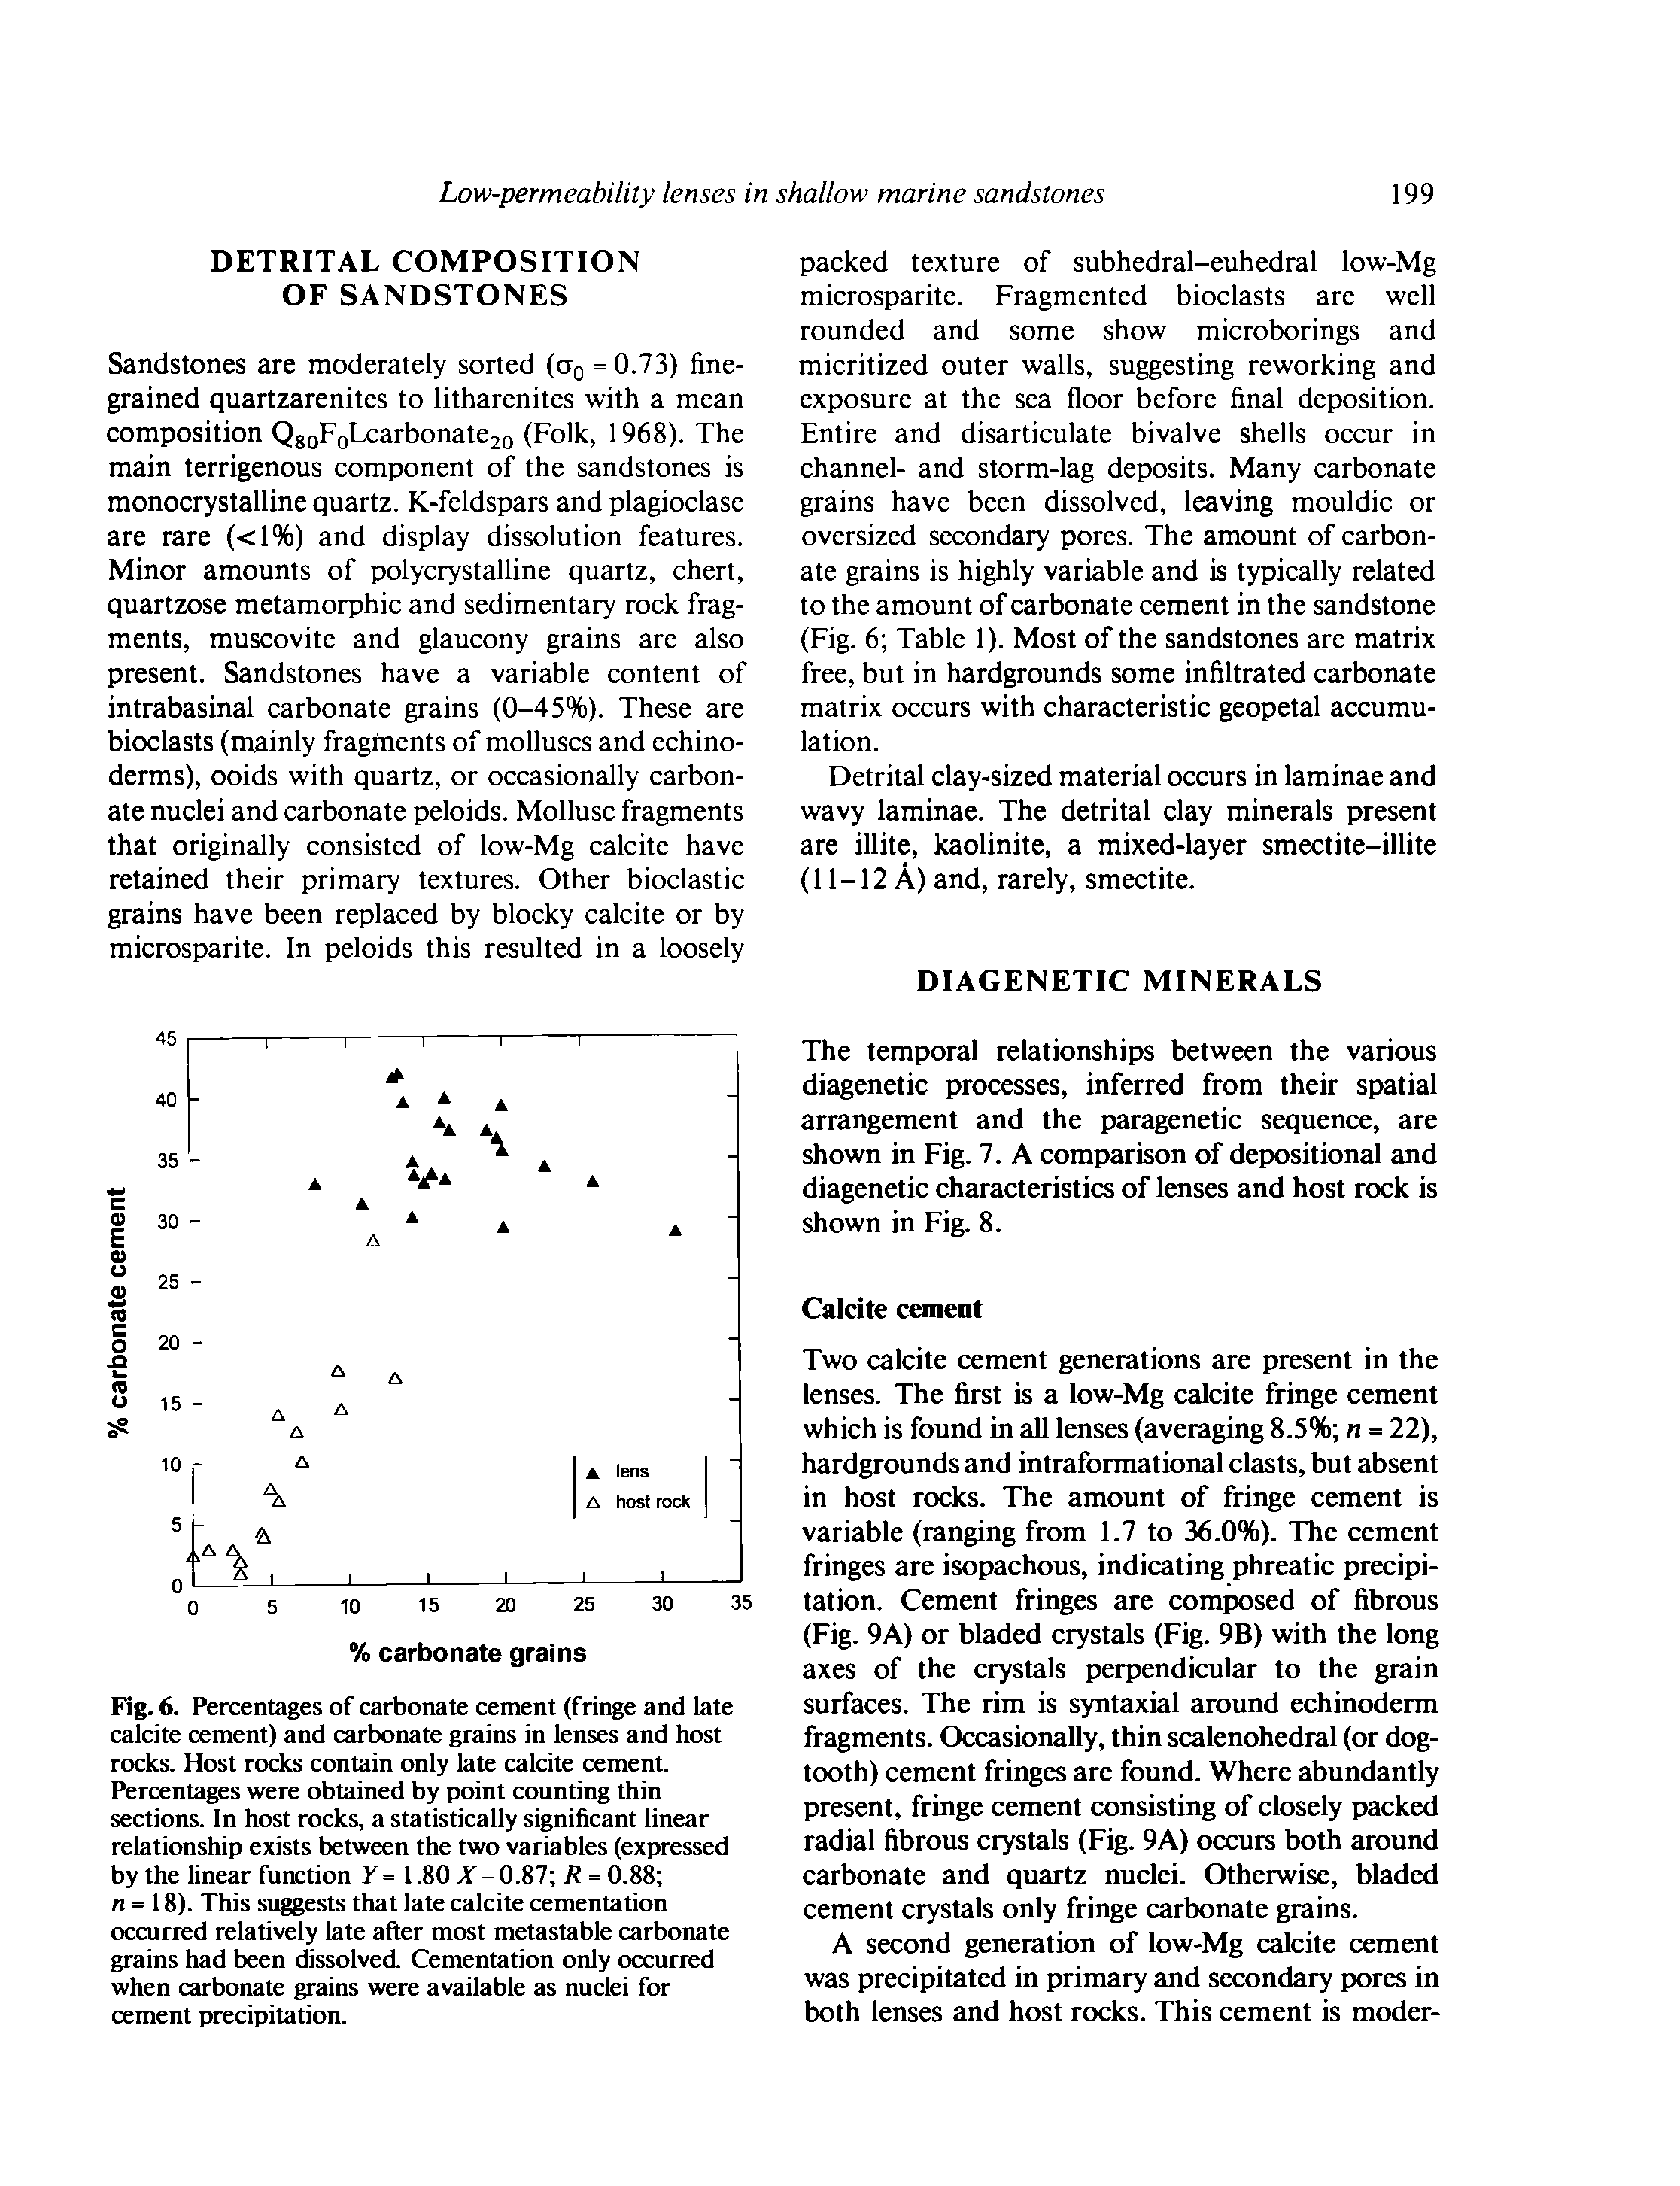 Fig. 6. Percentages of carbonate cement (fringe and late calcite cement) and carbonate grains in lenses and host rocks. Host rocks contain only late calcite cement. Percentages were obtained by point counting thin sections. In host rocks, a statistically significant linear relationship exists between the two variables (expressed by the linear function Y= 1.80 A- 0.87 / = 0.88 n = 18). This suggests that late calcite cementation occurred relatively late after most metastable carbonate grains had been dissolved. Cementation only occurred when carbonate grains were available as nuclei for cement precipitation.